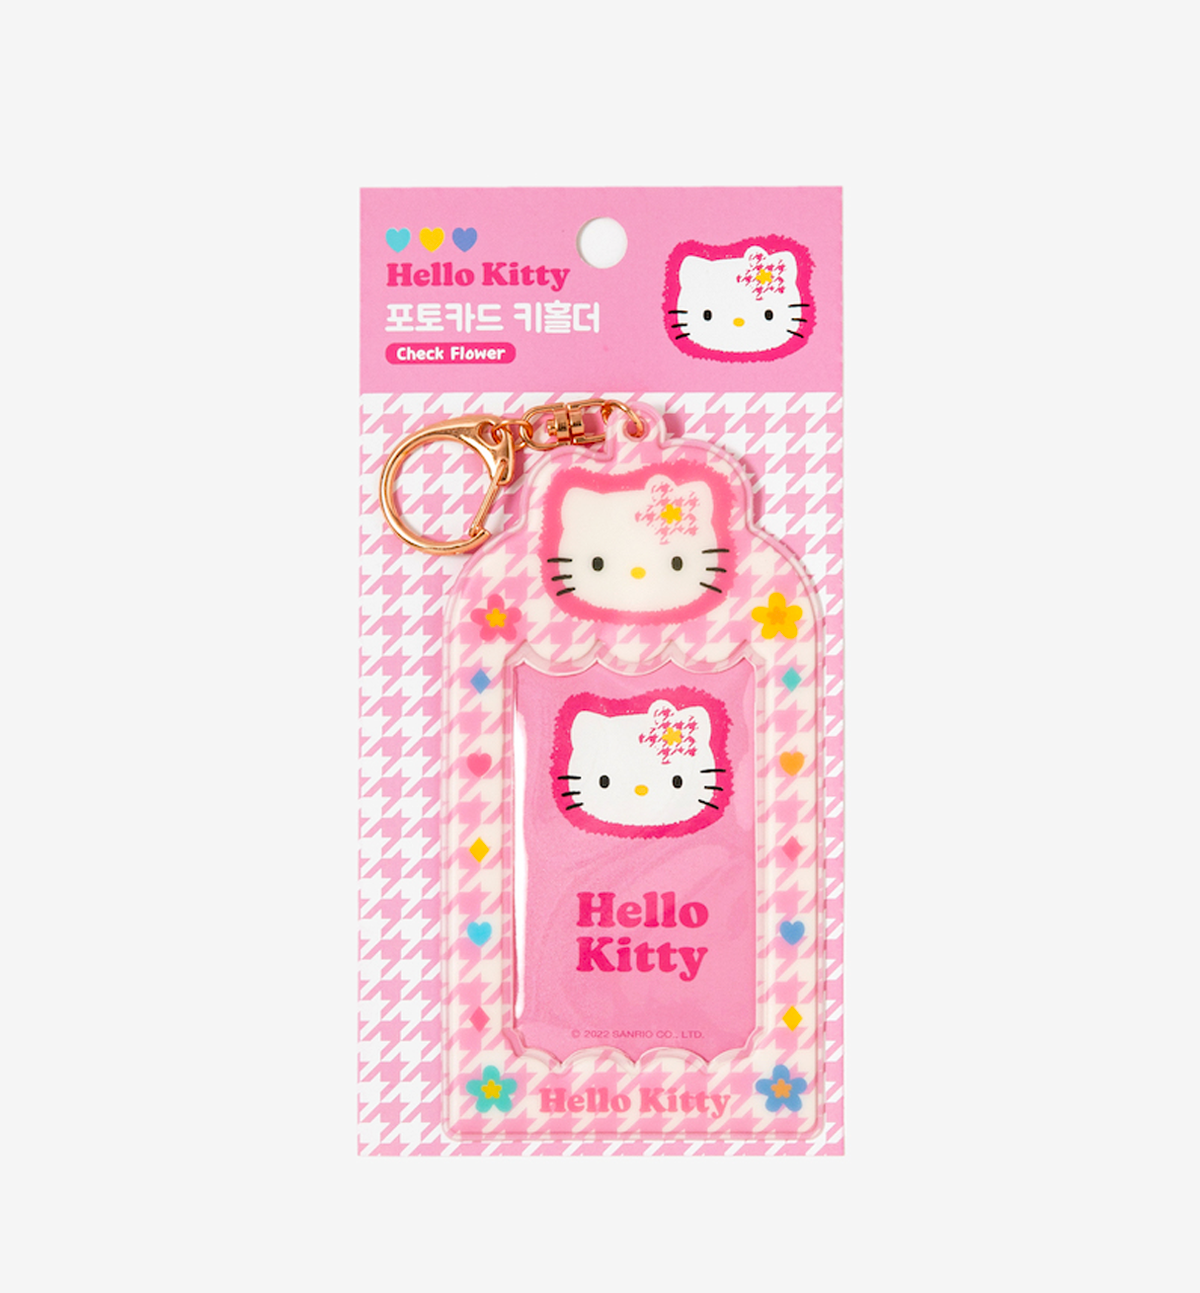 Hello Kitty Photocard Holder [Check Flower Pink]